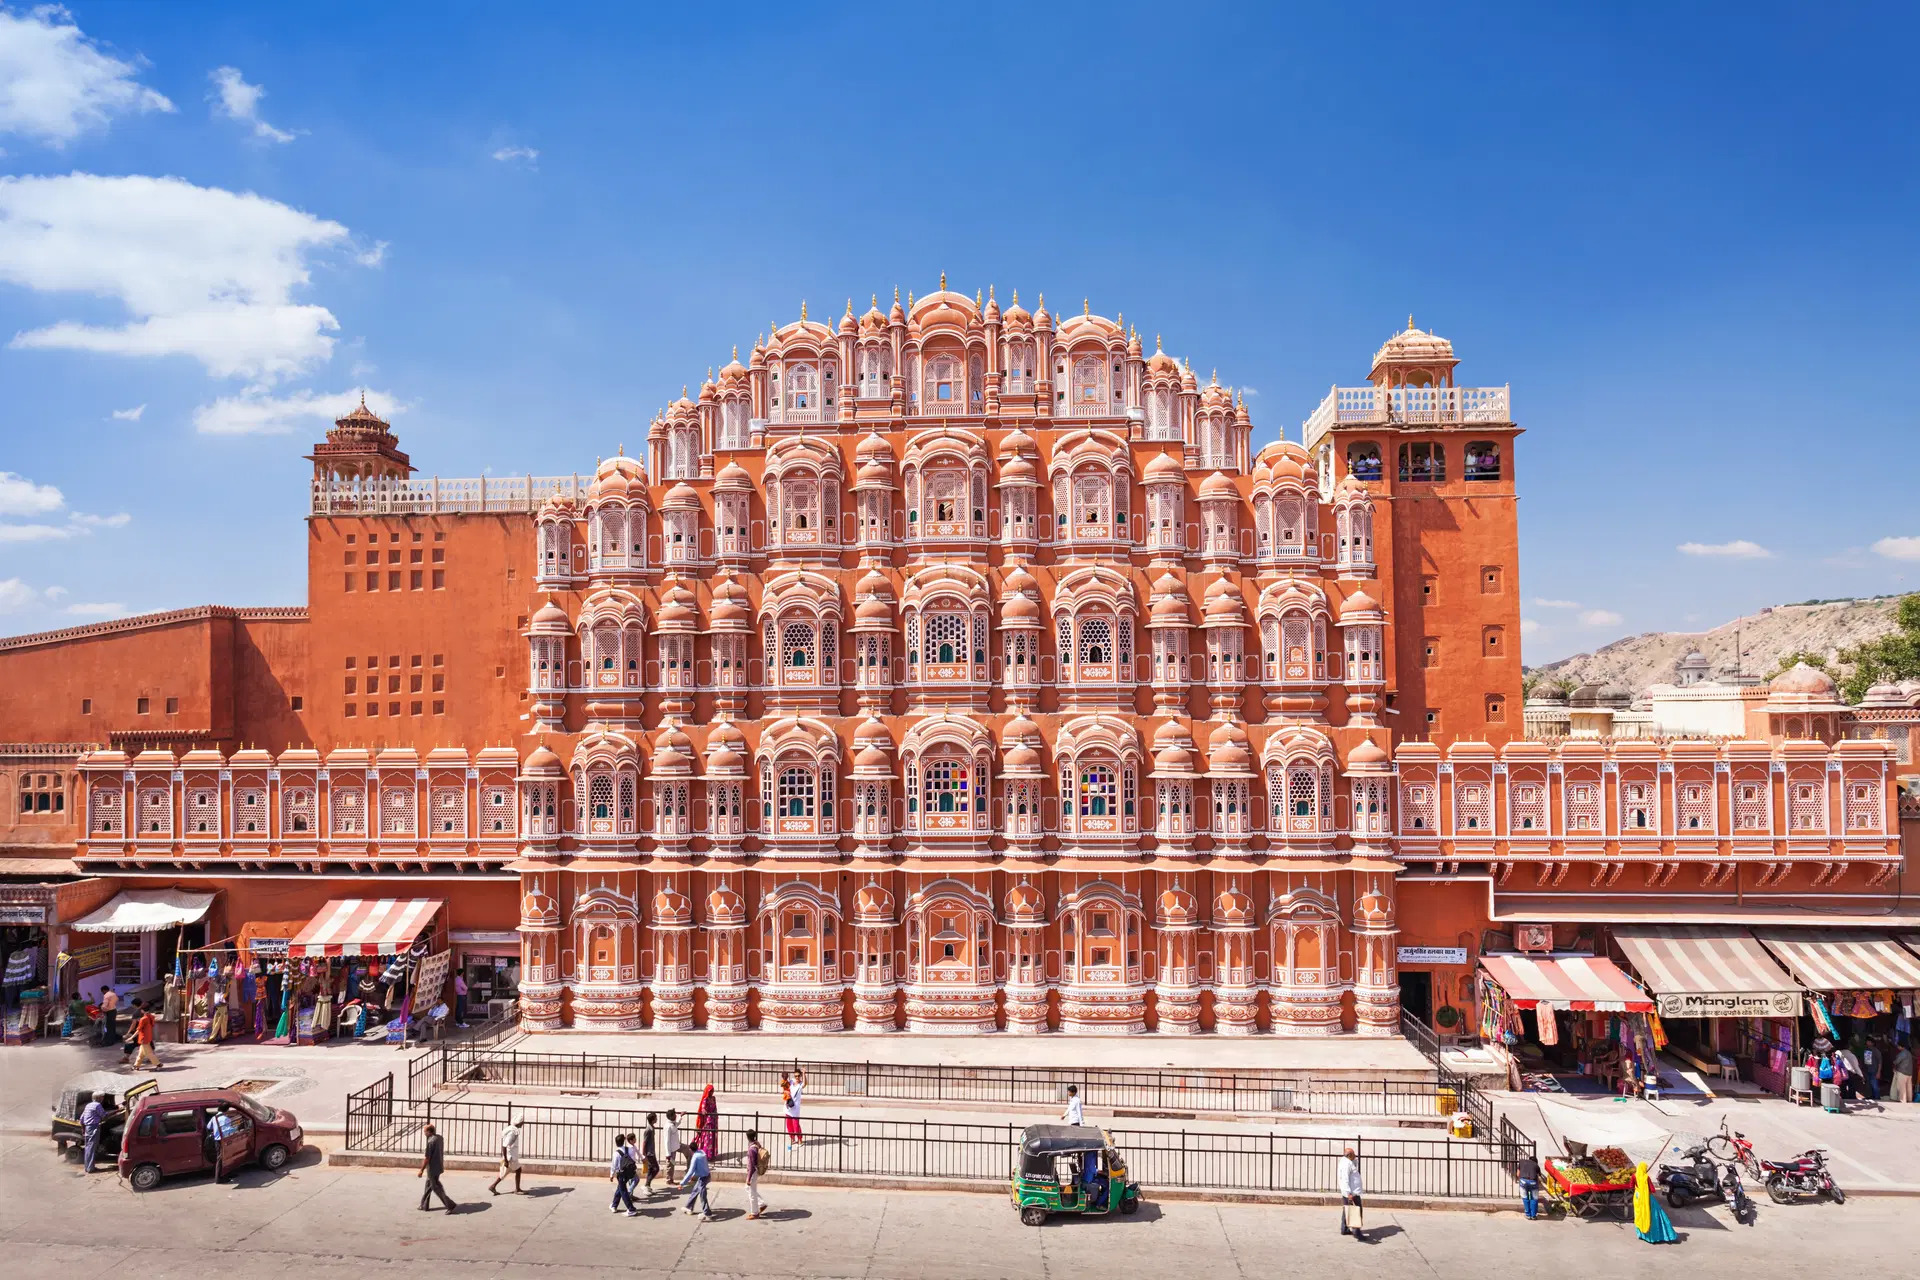 Golden Triangle Majesty - An Expedition through Delhi, Agra and Jaipur